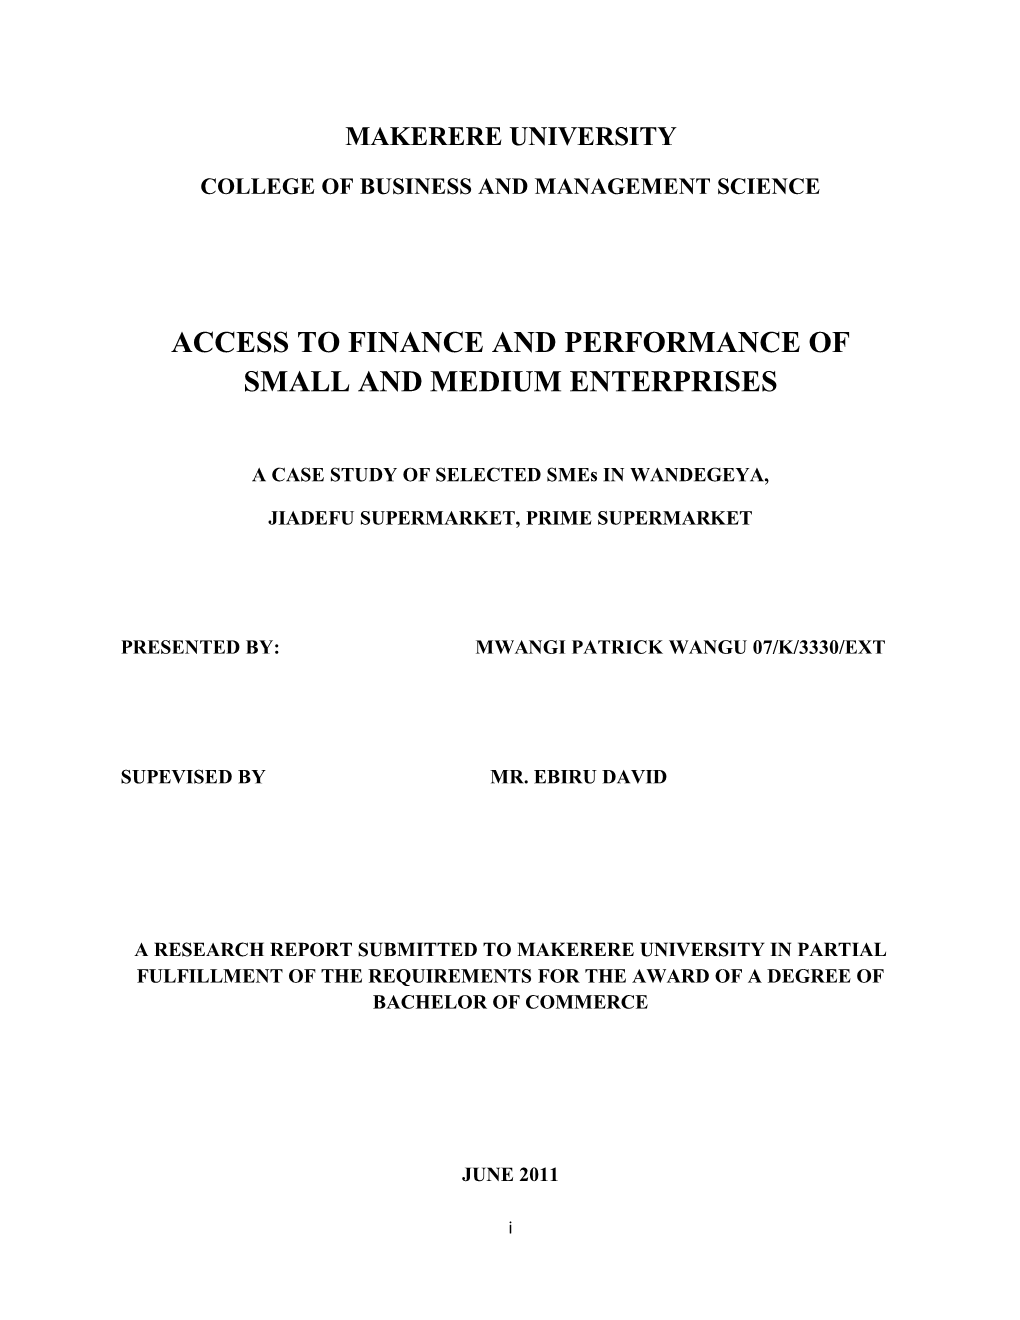 Access to Finance and Performance of Small and Medium Enterprises